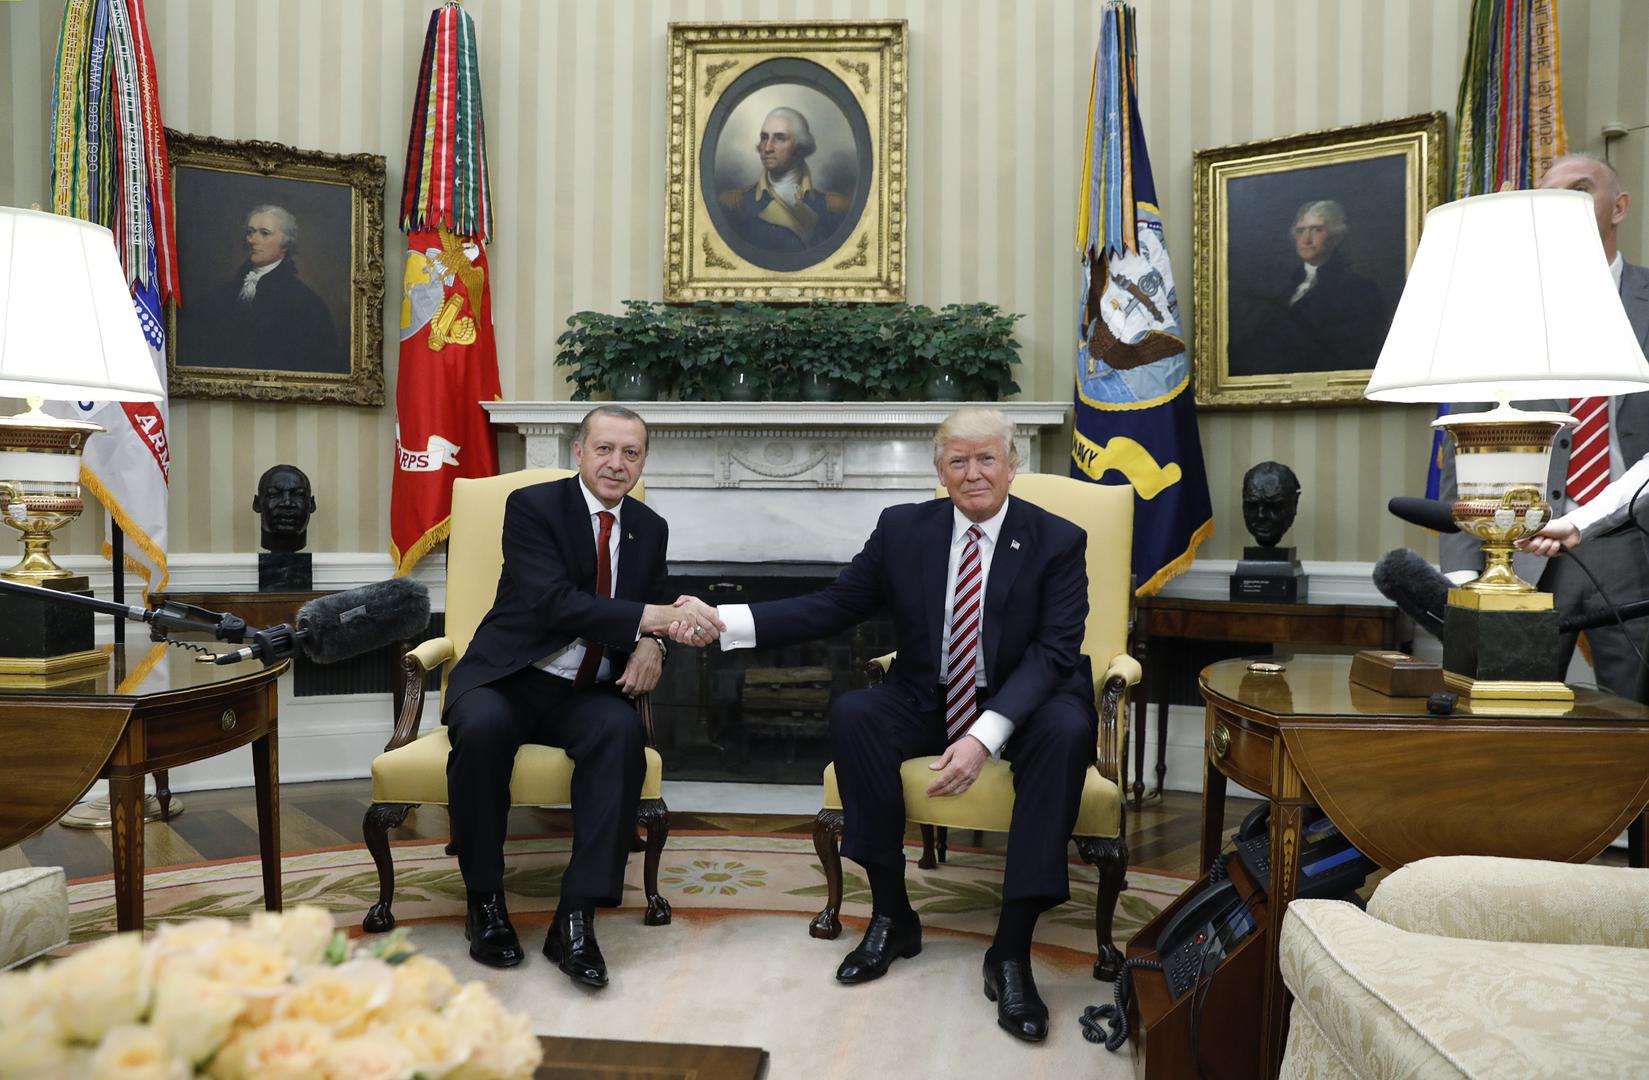 Turkey's President Recep Tayyip Erdogan shakes hands with U.S President Donald Trump in the Oval Office of the White House in Washington D.C., May 16, 2017.